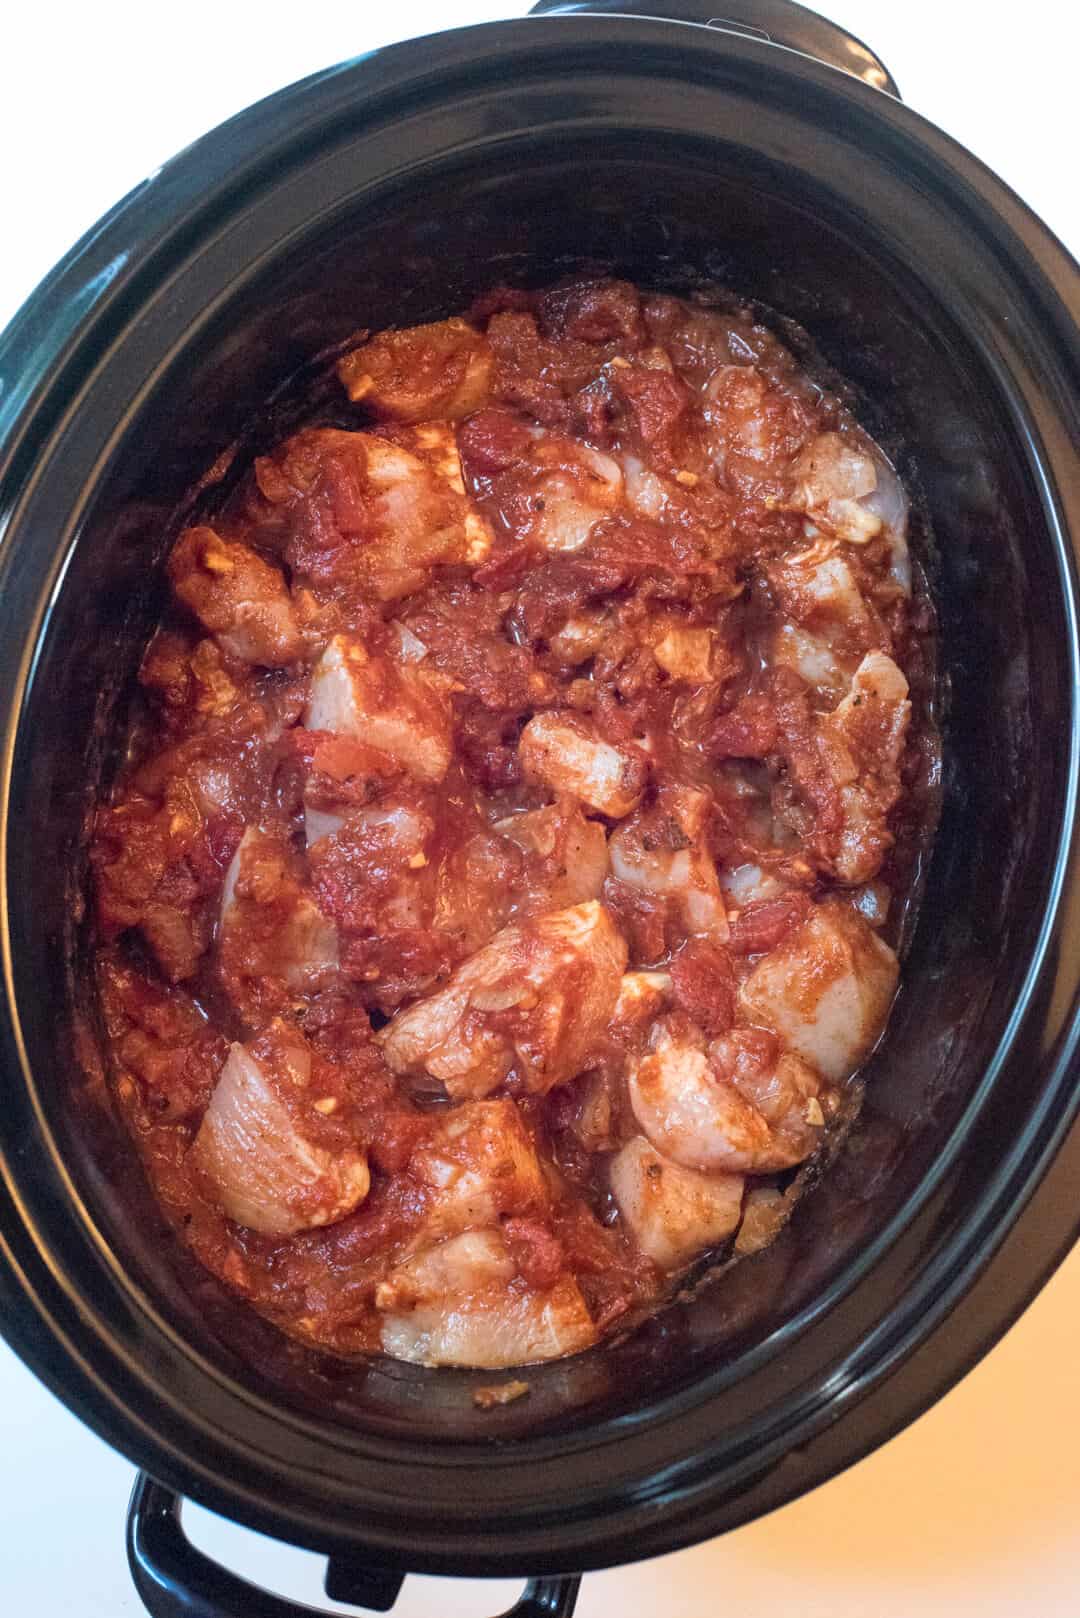 Raw chicken topped with sauce in a slow cooker.